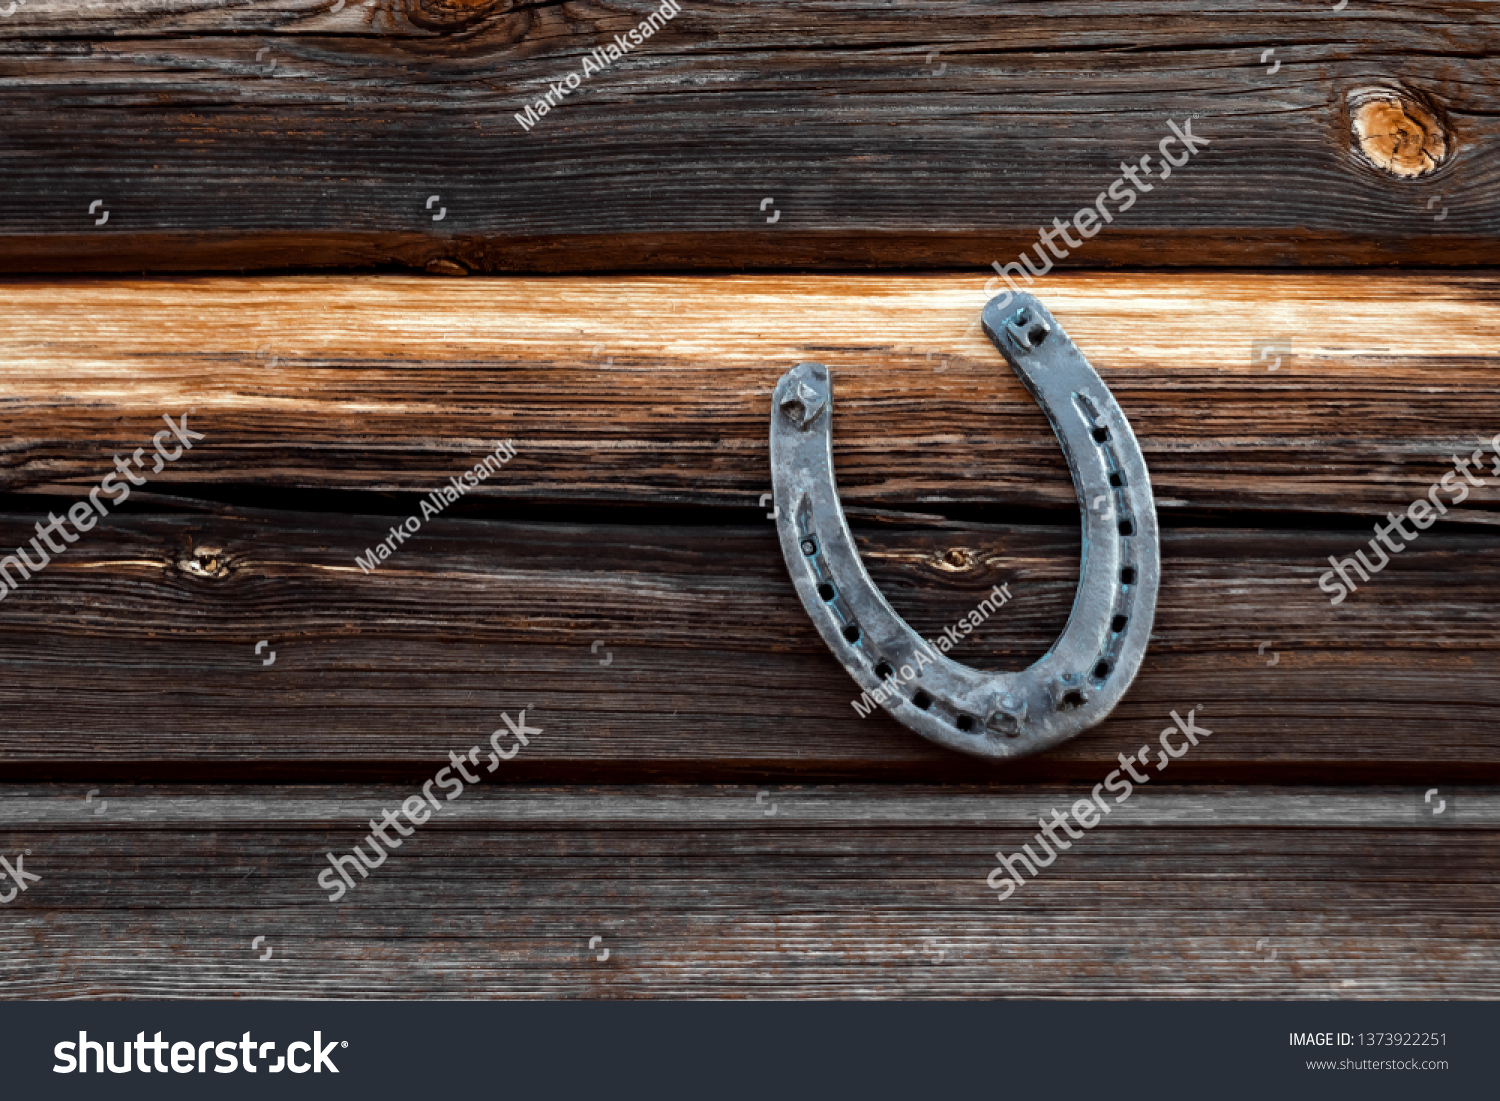 Old horseshoe on an old wooden board. The concept of luck, luck, luck. #1373922251